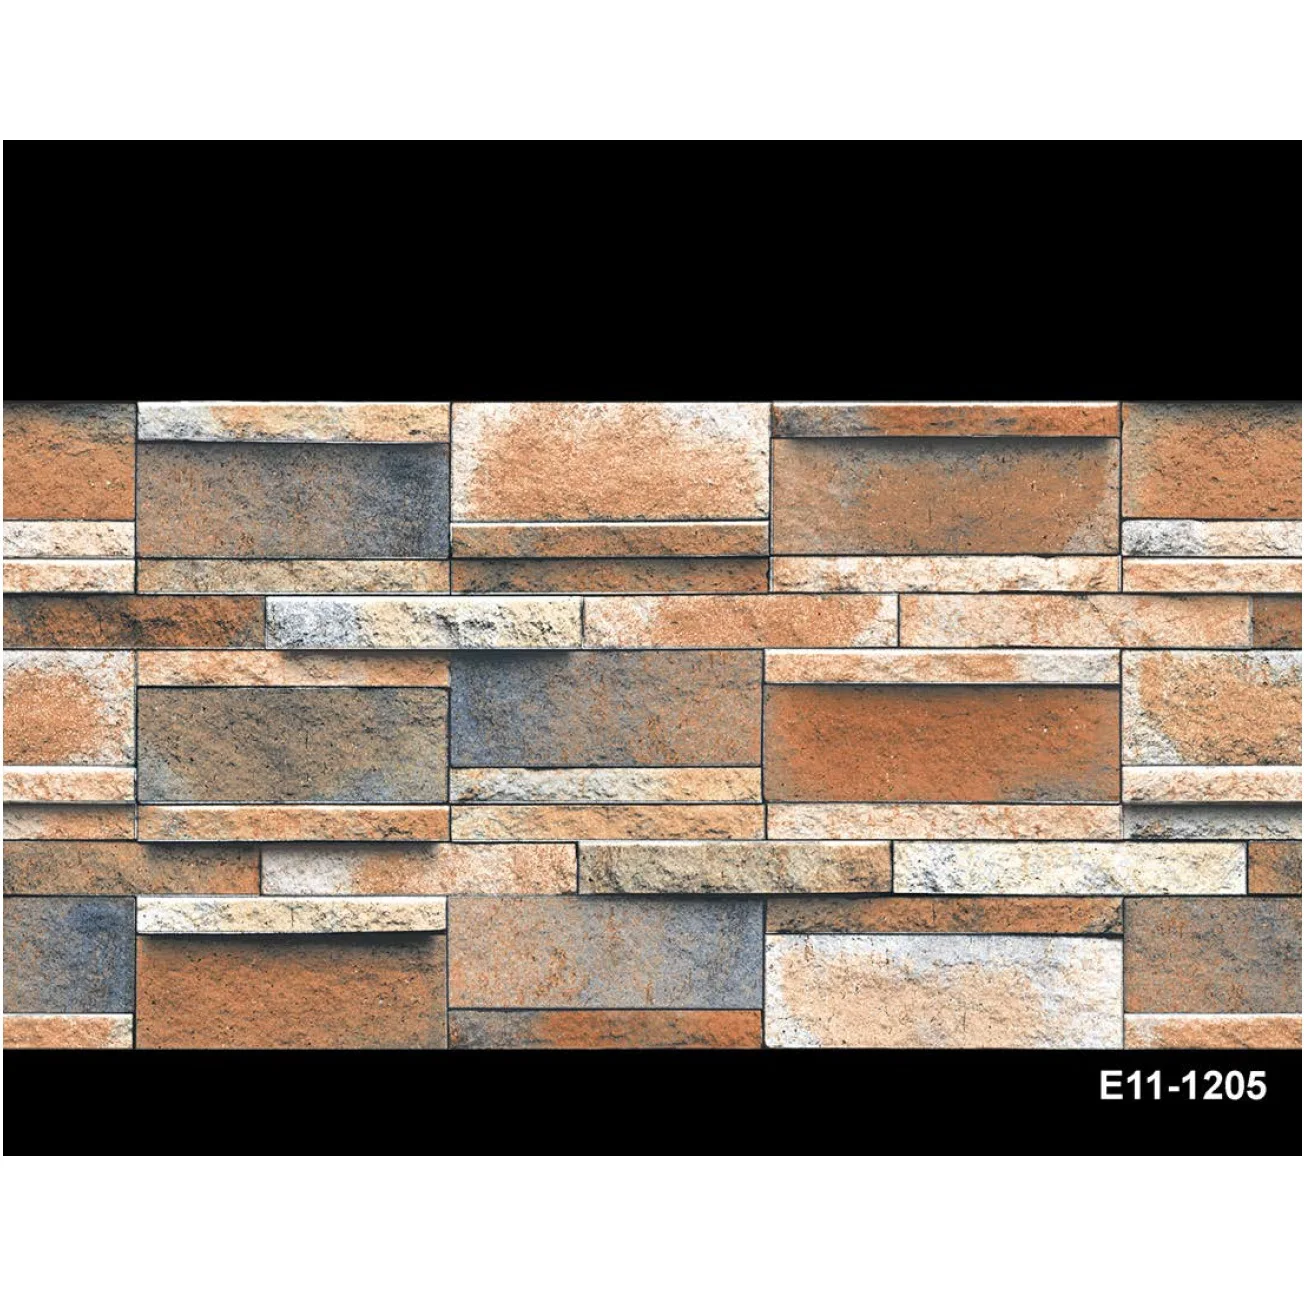 Source Digital Wall Tiles - Elevation / Outdoor / House Front Wall ...